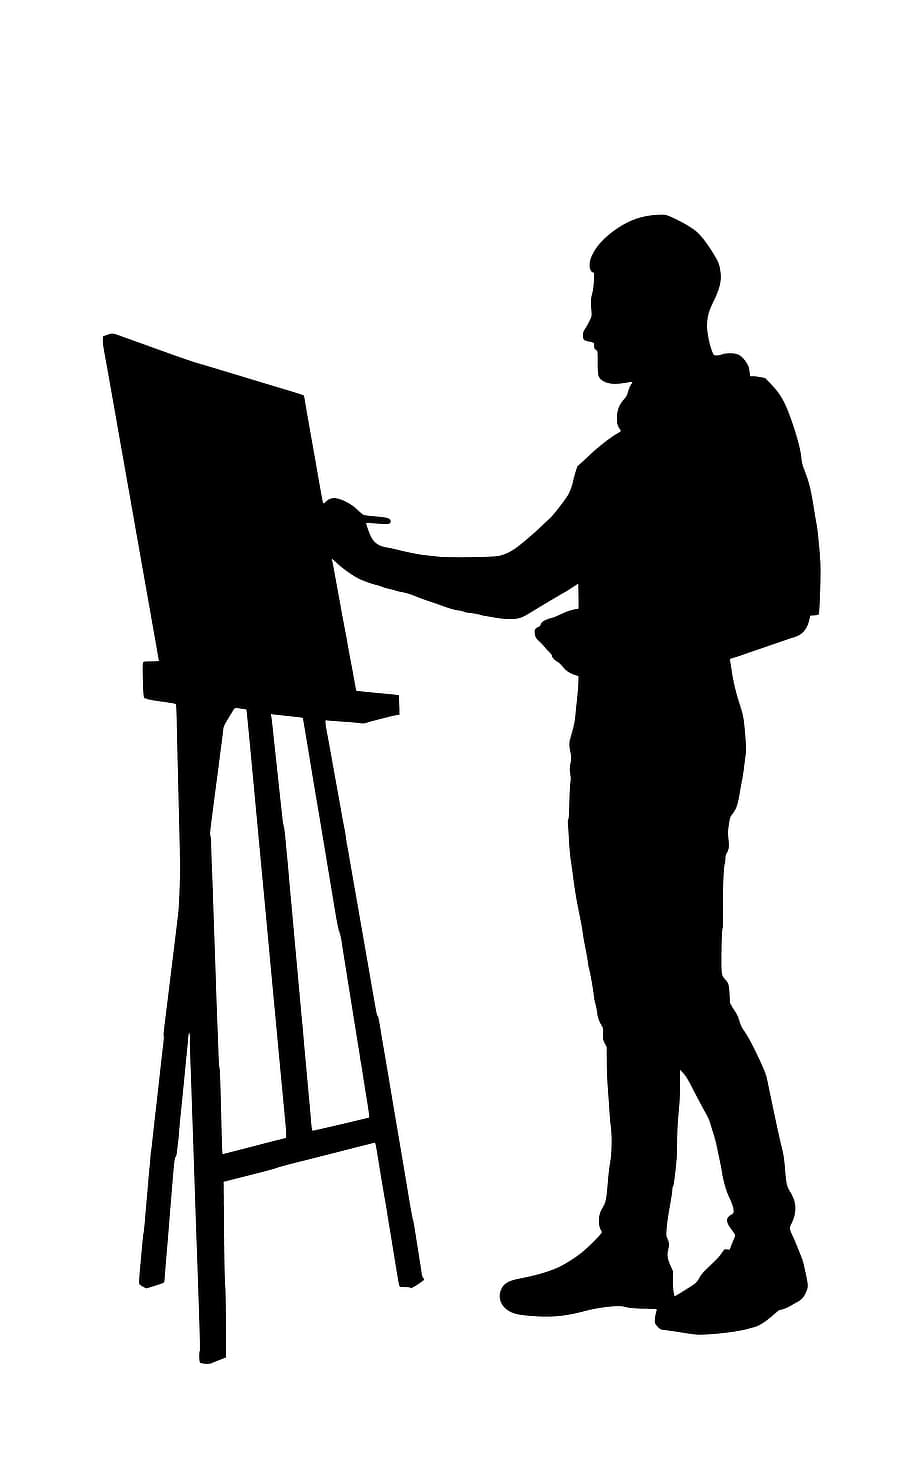 HD Wallpaper Illustration Of Artist Standing At An Easel Working